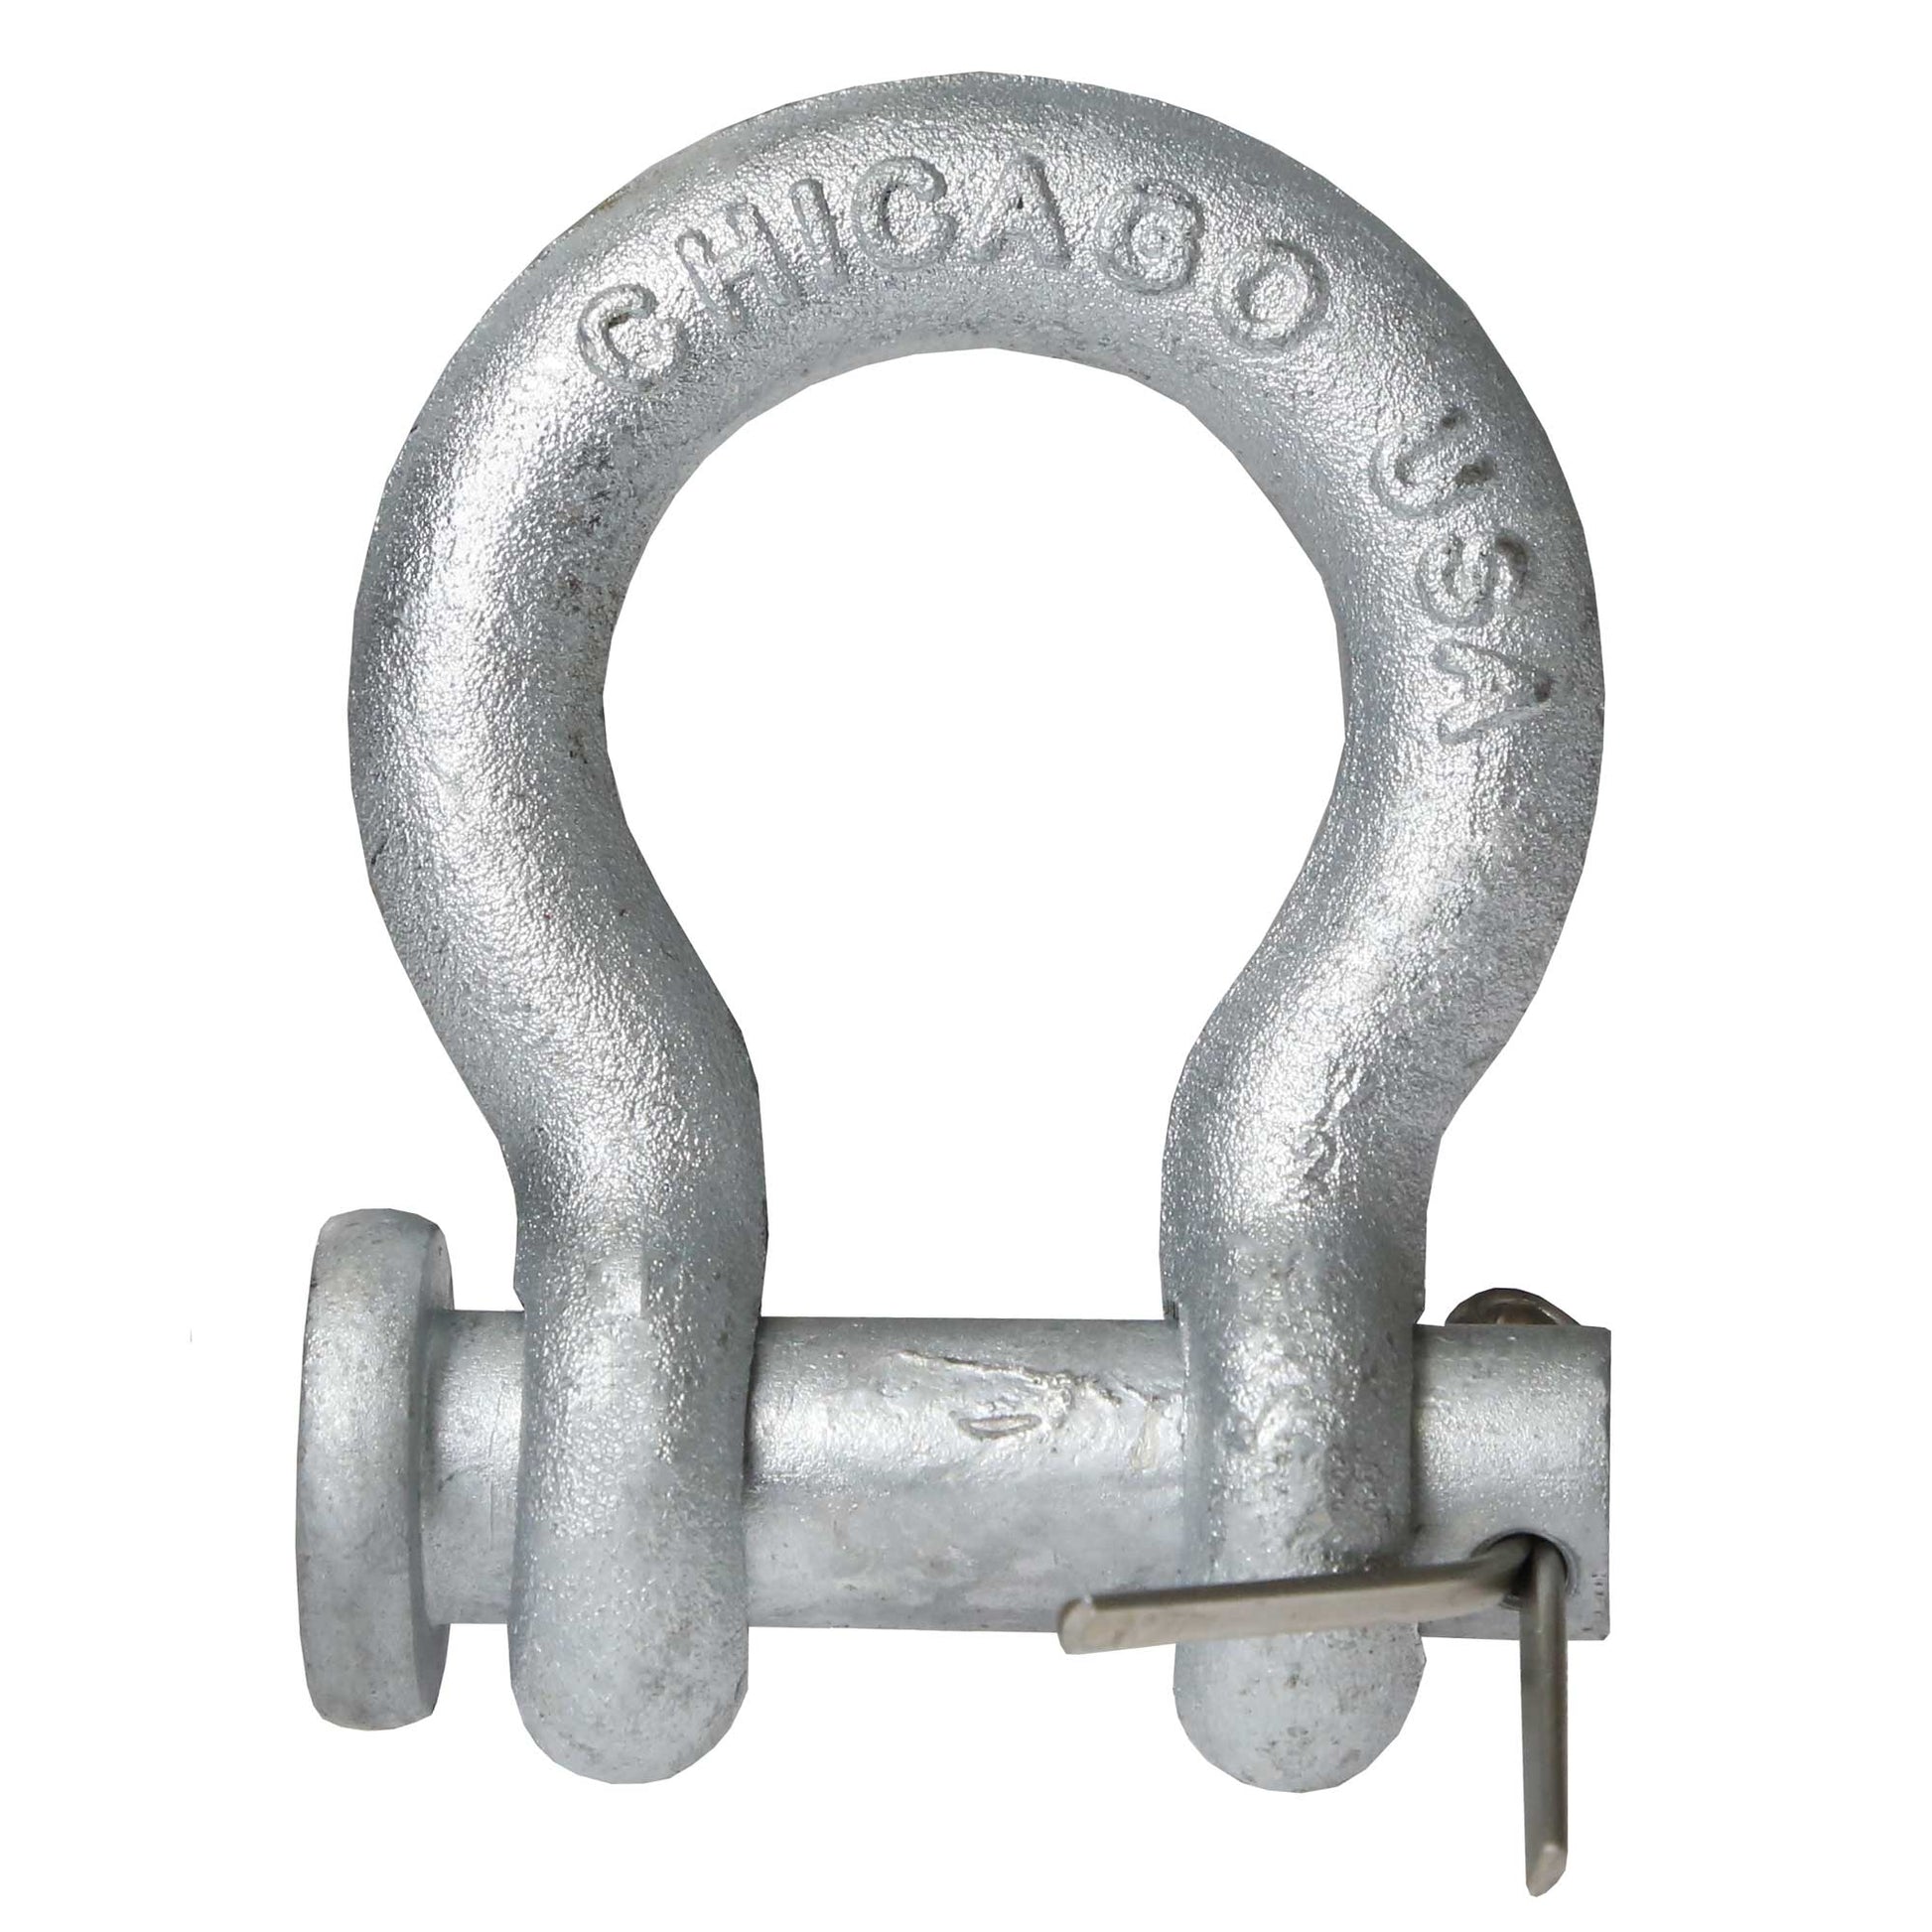 Anchor Shackle - Chicago Hardware - Round Pin - 3/8" Galvanized Steel - 1 Ton primary image